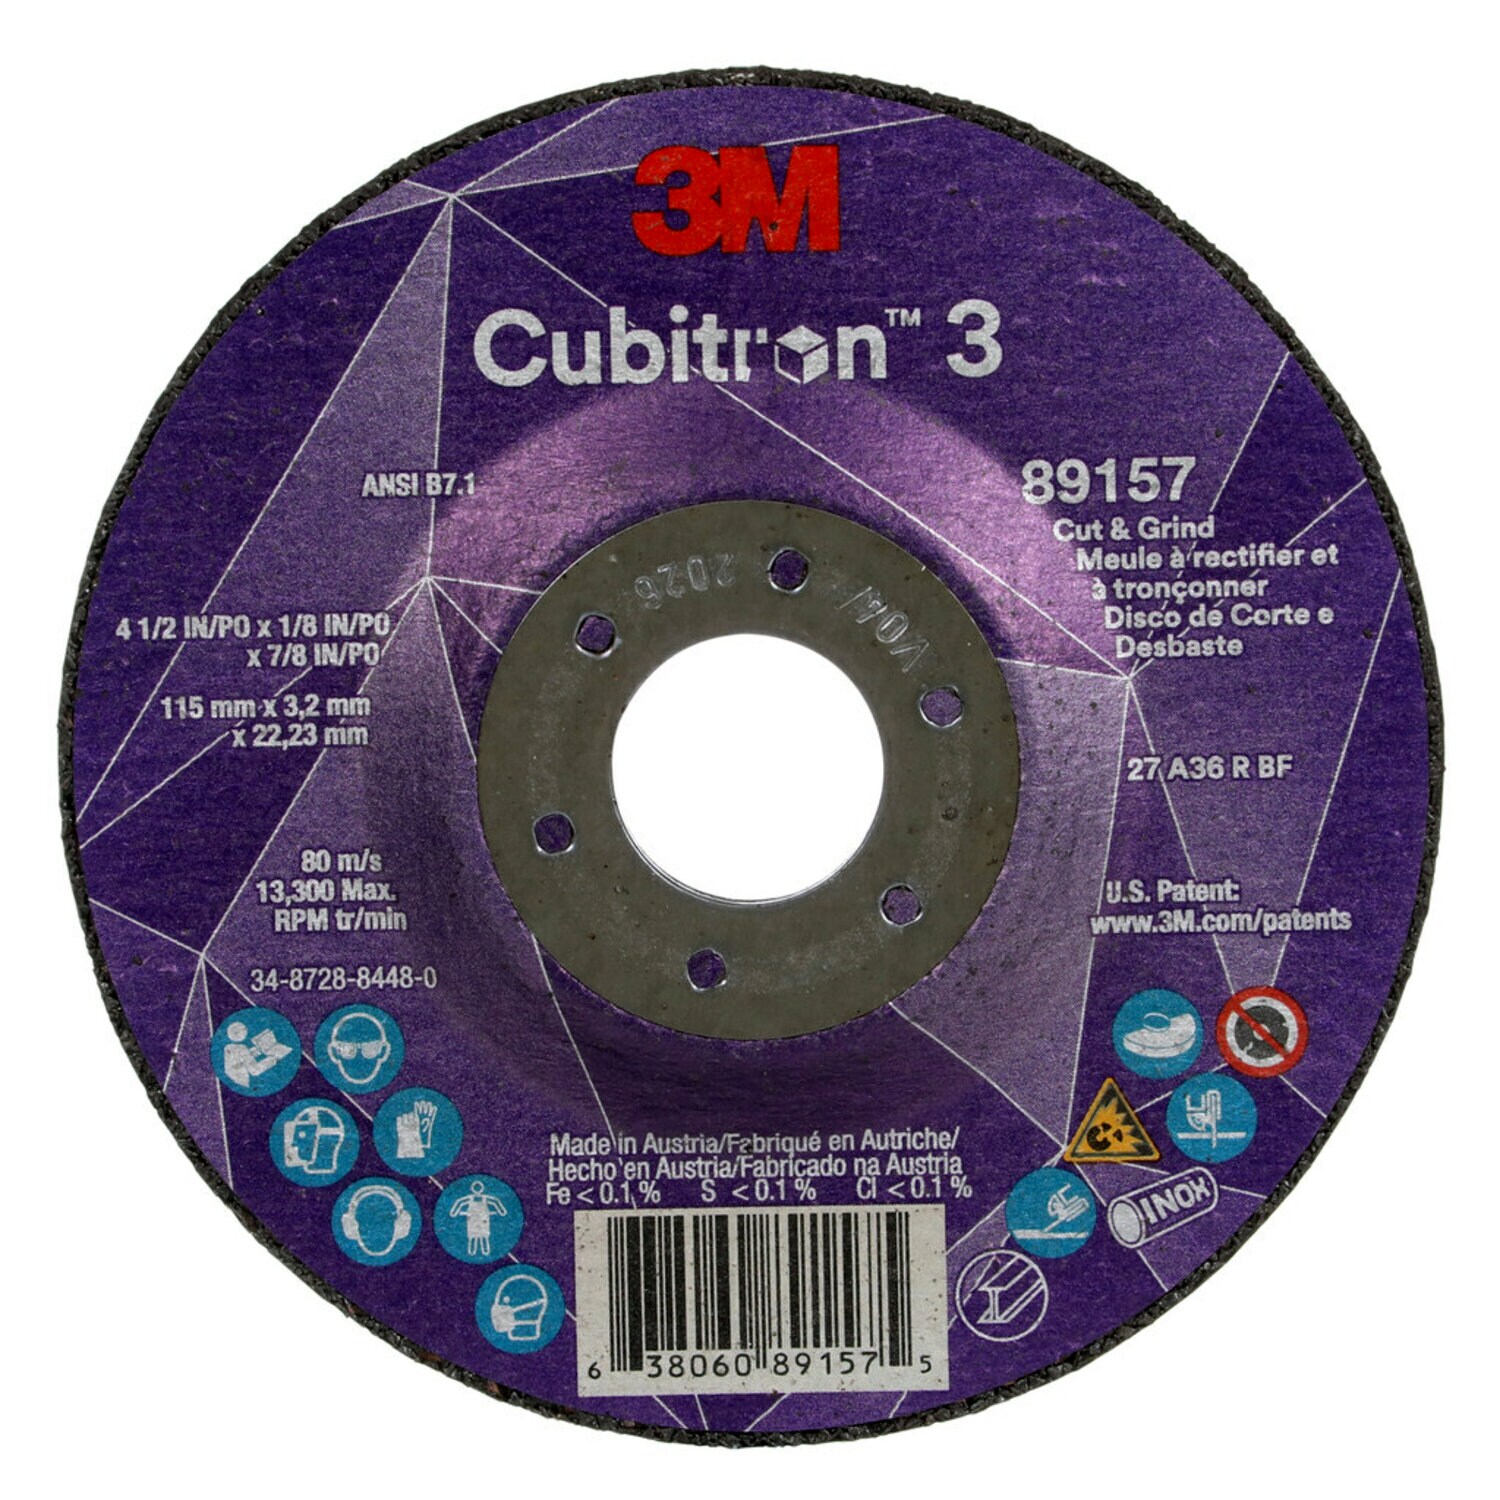 7100305149 - 3M Cubitron 3 Cut and Grind Wheel, 89157, 36+, T27, 4-1/2 in x 1/8 in
x 7/8 in (115 x 3.2 x 22.23 mm), ANSI, 10/Pack, 20 ea/Case